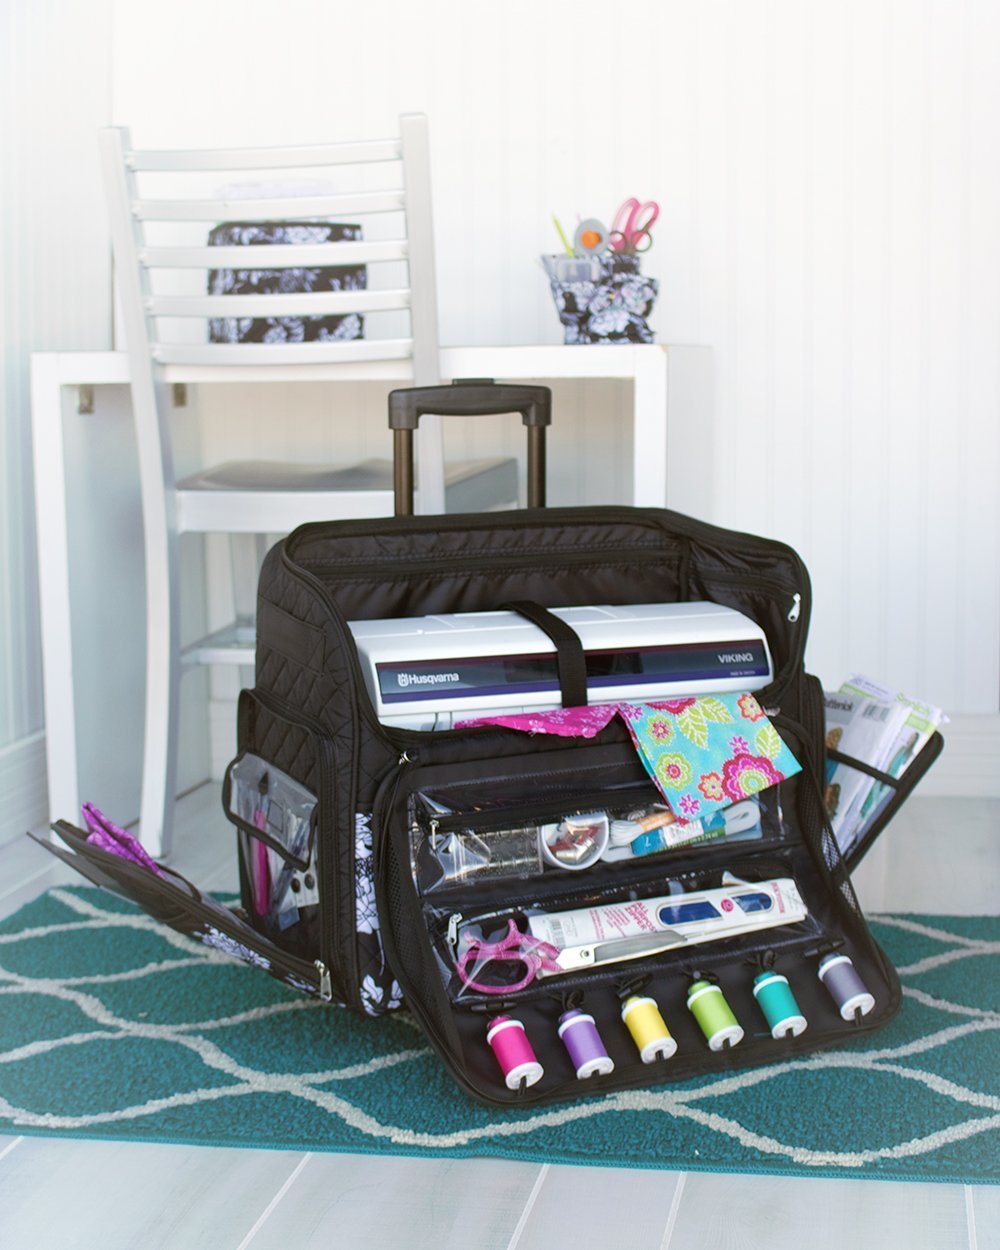 10+ Fabulous Sewing Organizers: Are you ready to get your craft/sewing room in order? Here are some fabulous sewing organizers that will help you clear the clutter! Click through for a full list. | www.sewwhatalicia.com